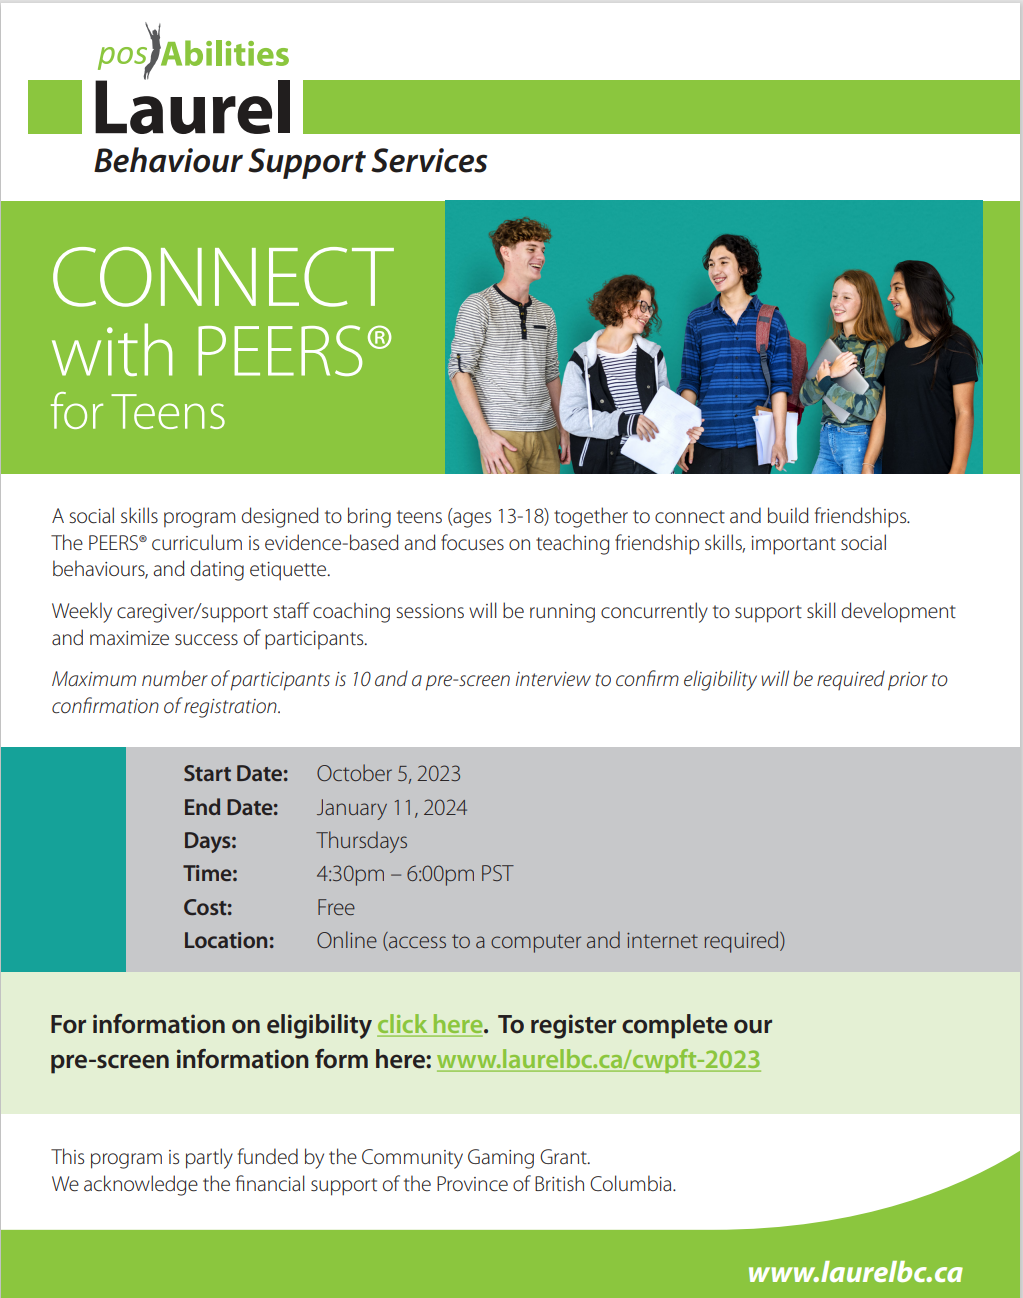 Connect with PEERS(R) for Teens